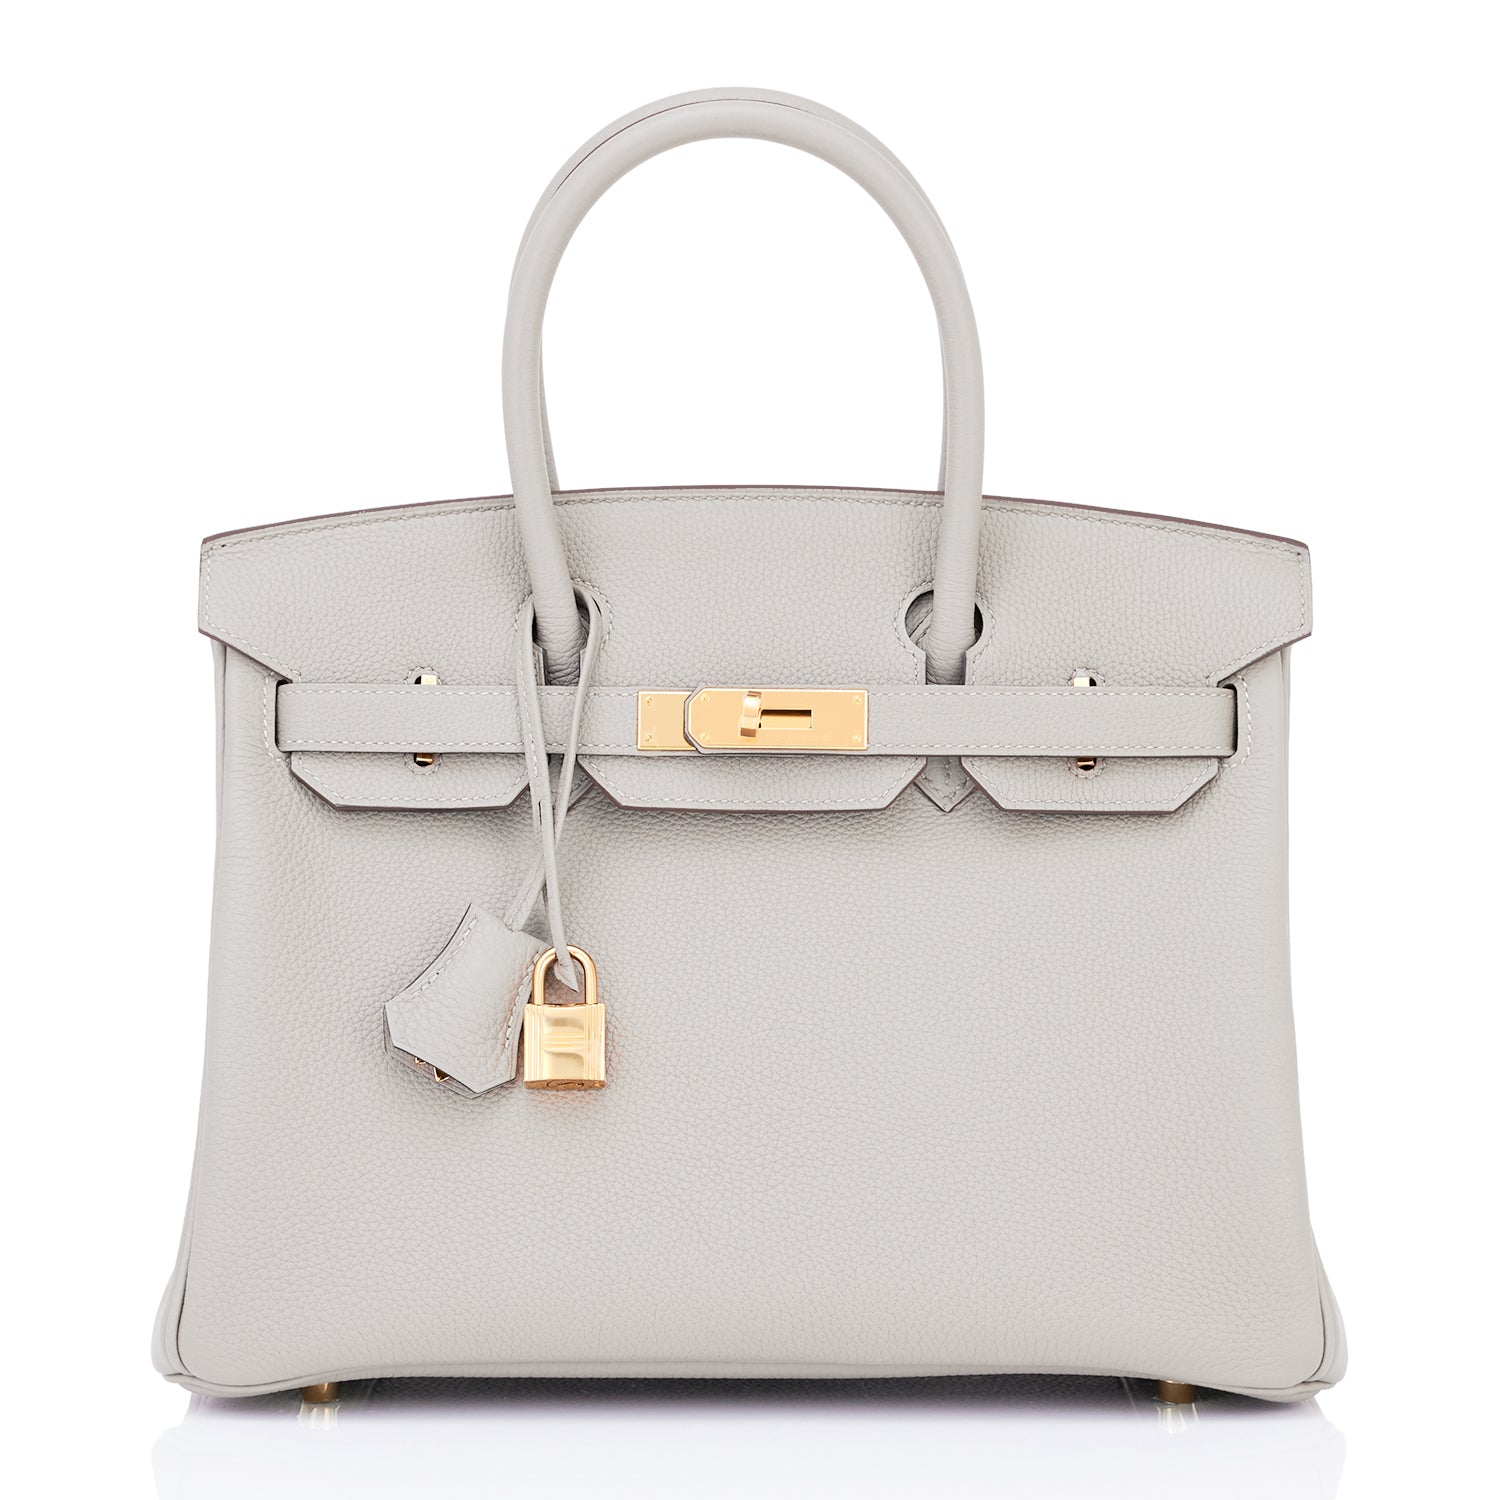 Hermes Gold Breloque Charm for Birkin or Kelly - Chicjoy